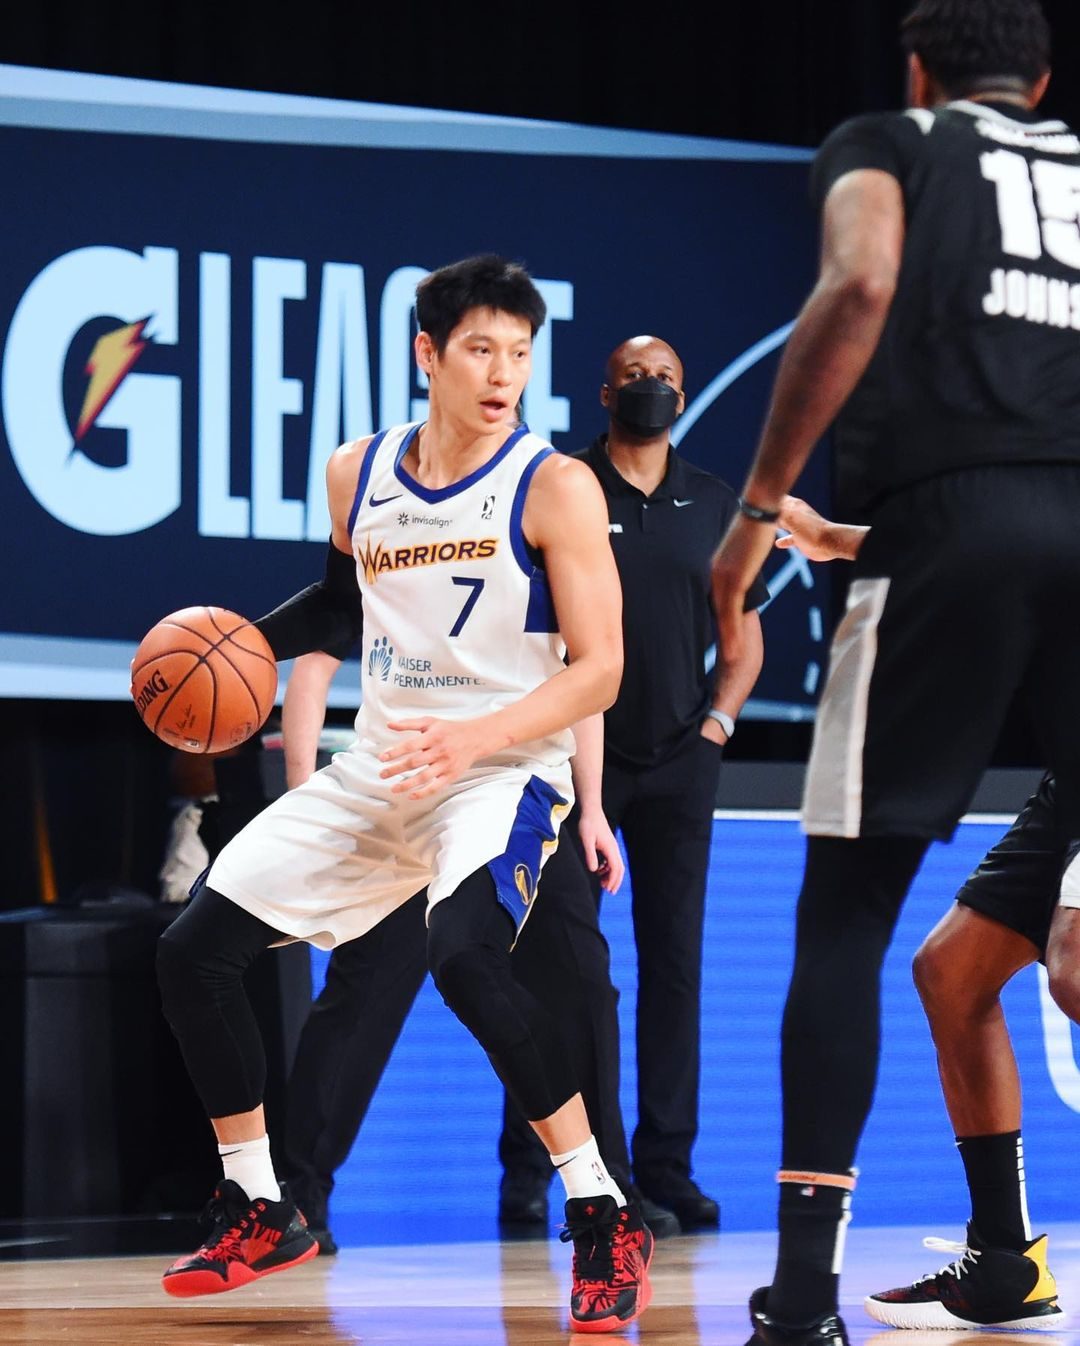 Basketball-Lin fears calling out anti-Asian racism could encourage hate